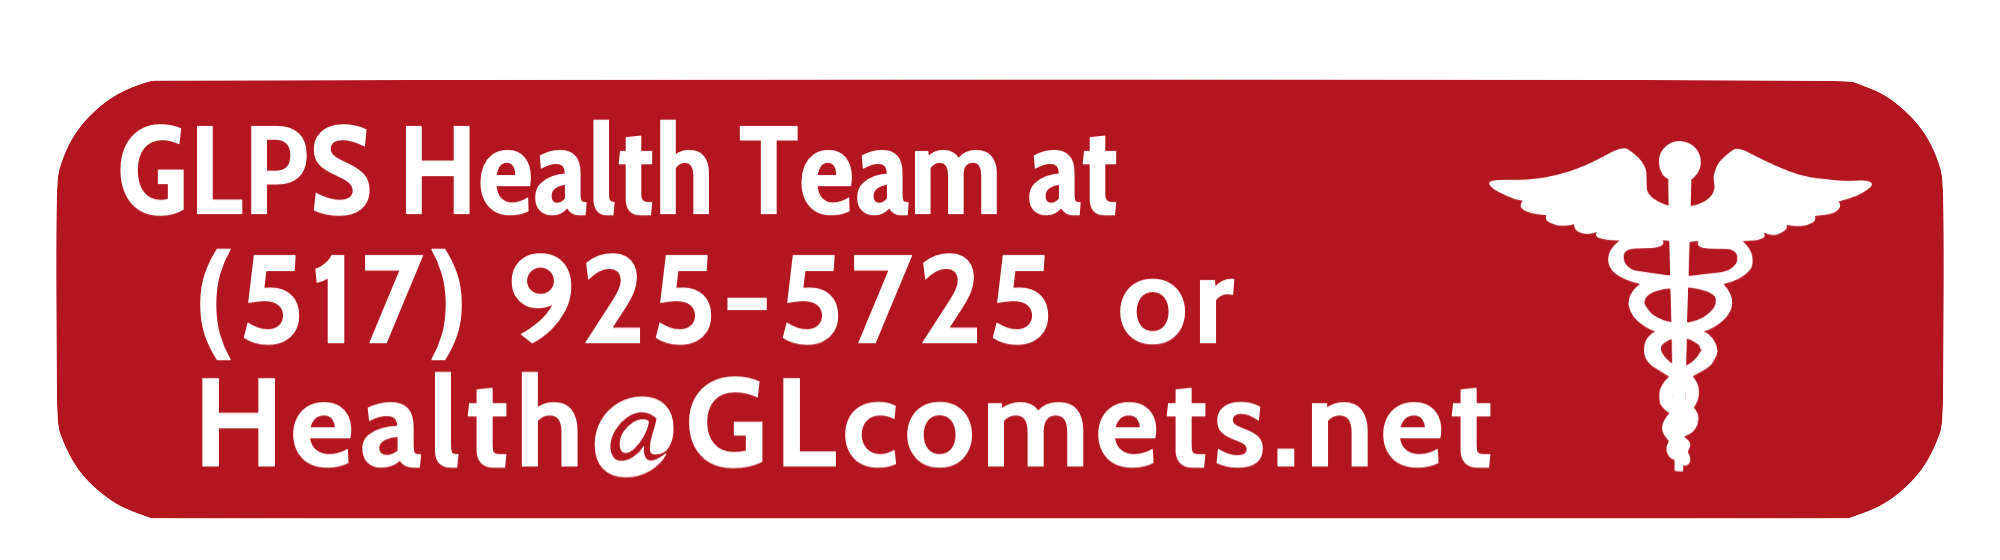 GLPS Health Team at (517) 925-5725 or Health@GLcomets.net